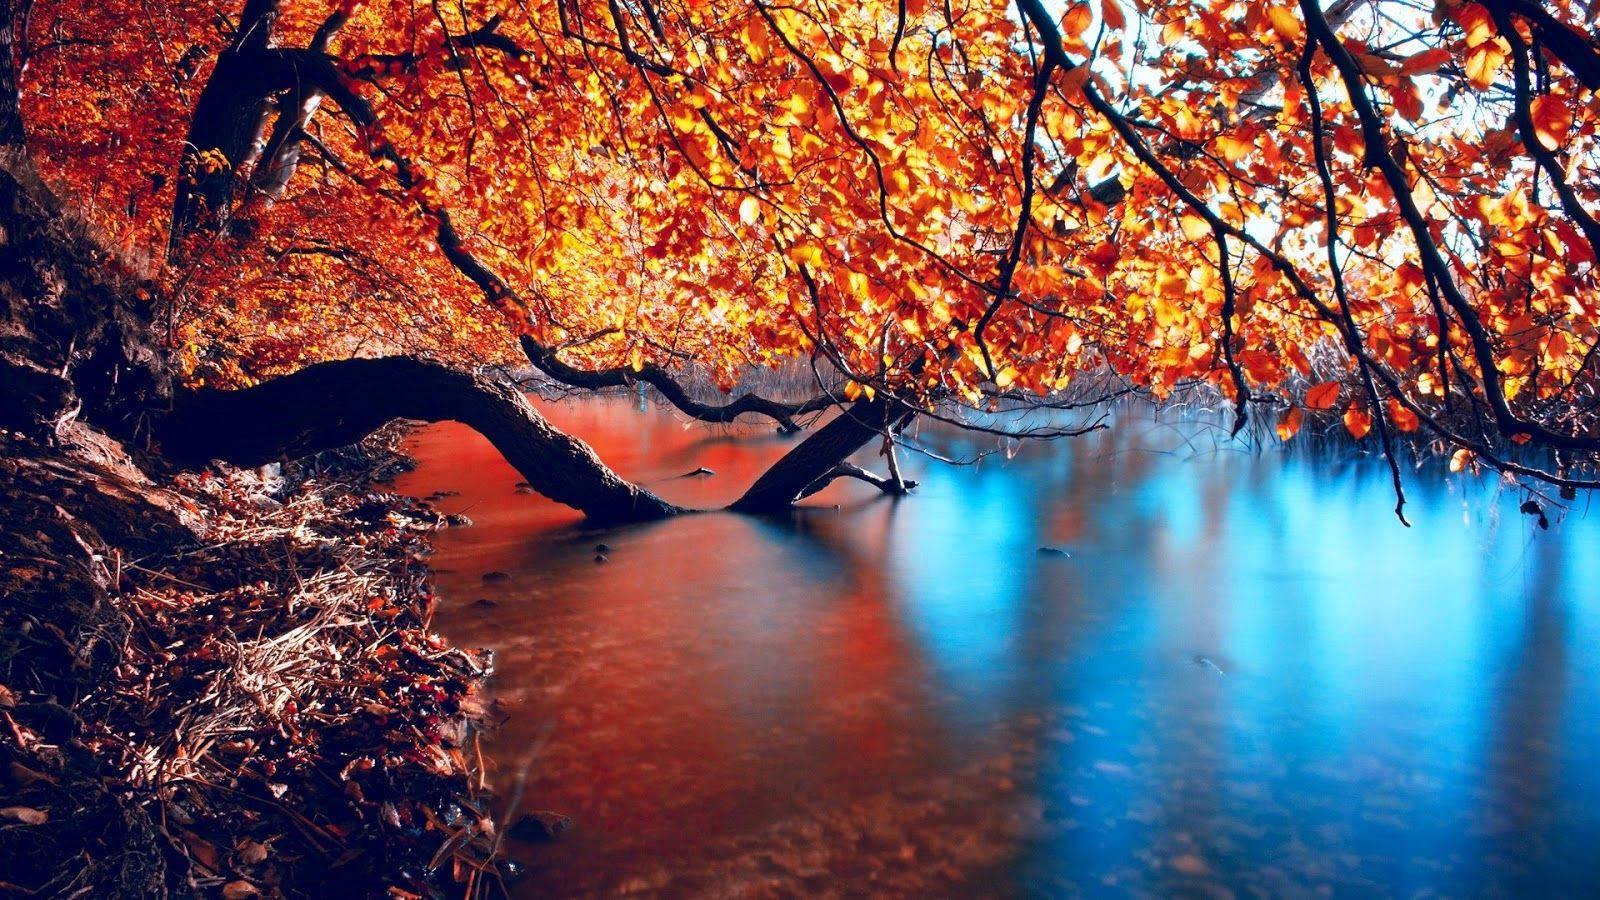 Wide lake with big branch of red tree on water during autumn season.